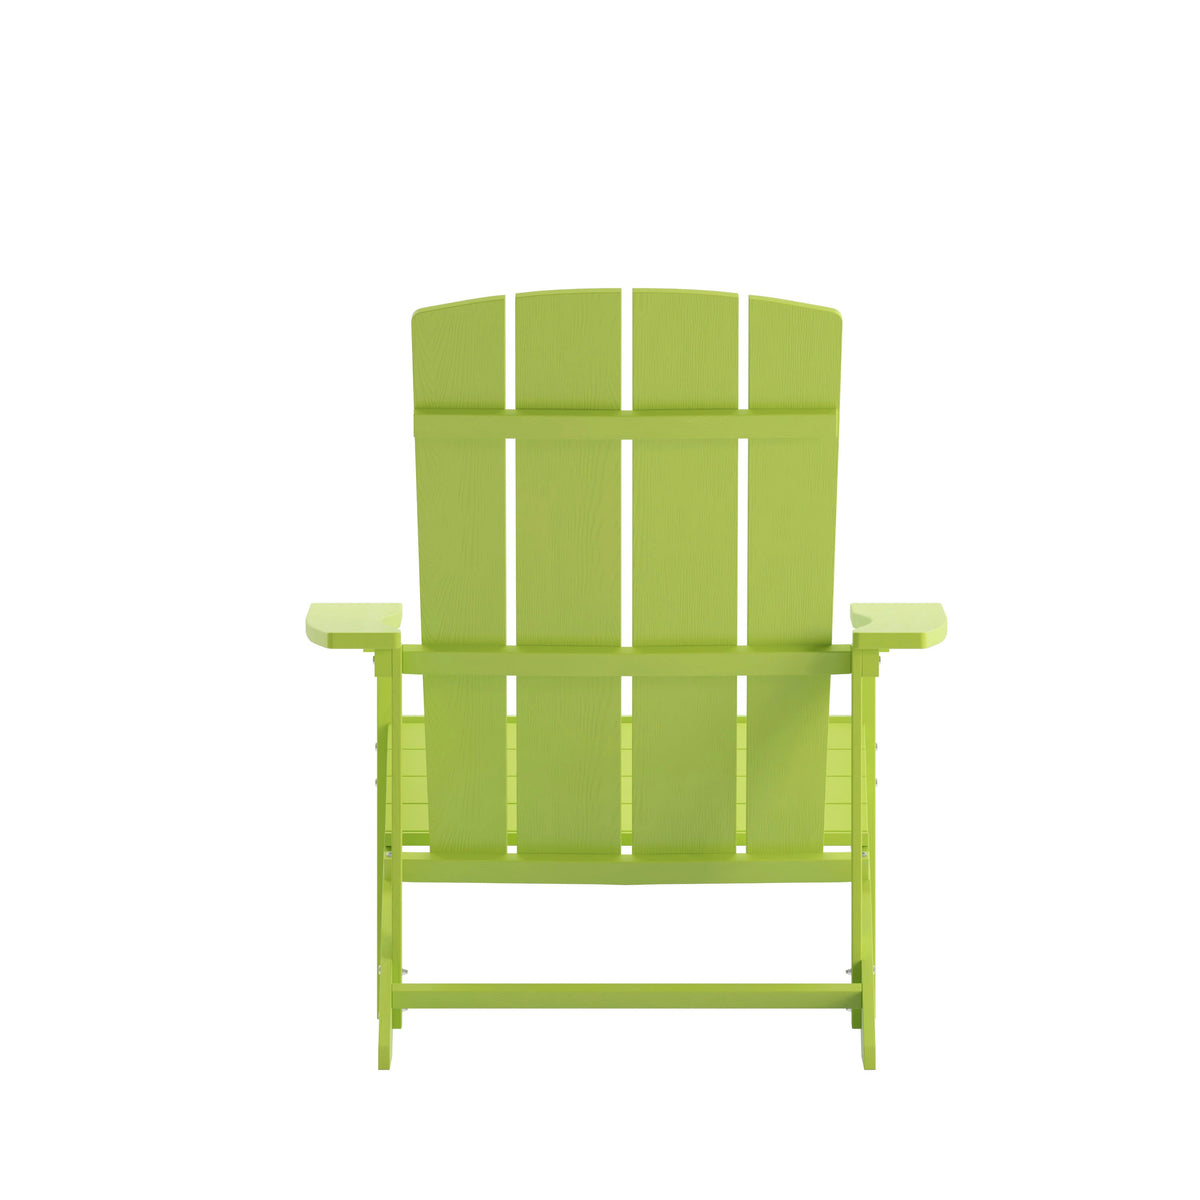 Lime |#| Outdoor Lime Green All-Weather Poly Resin Wood Adirondack Chair